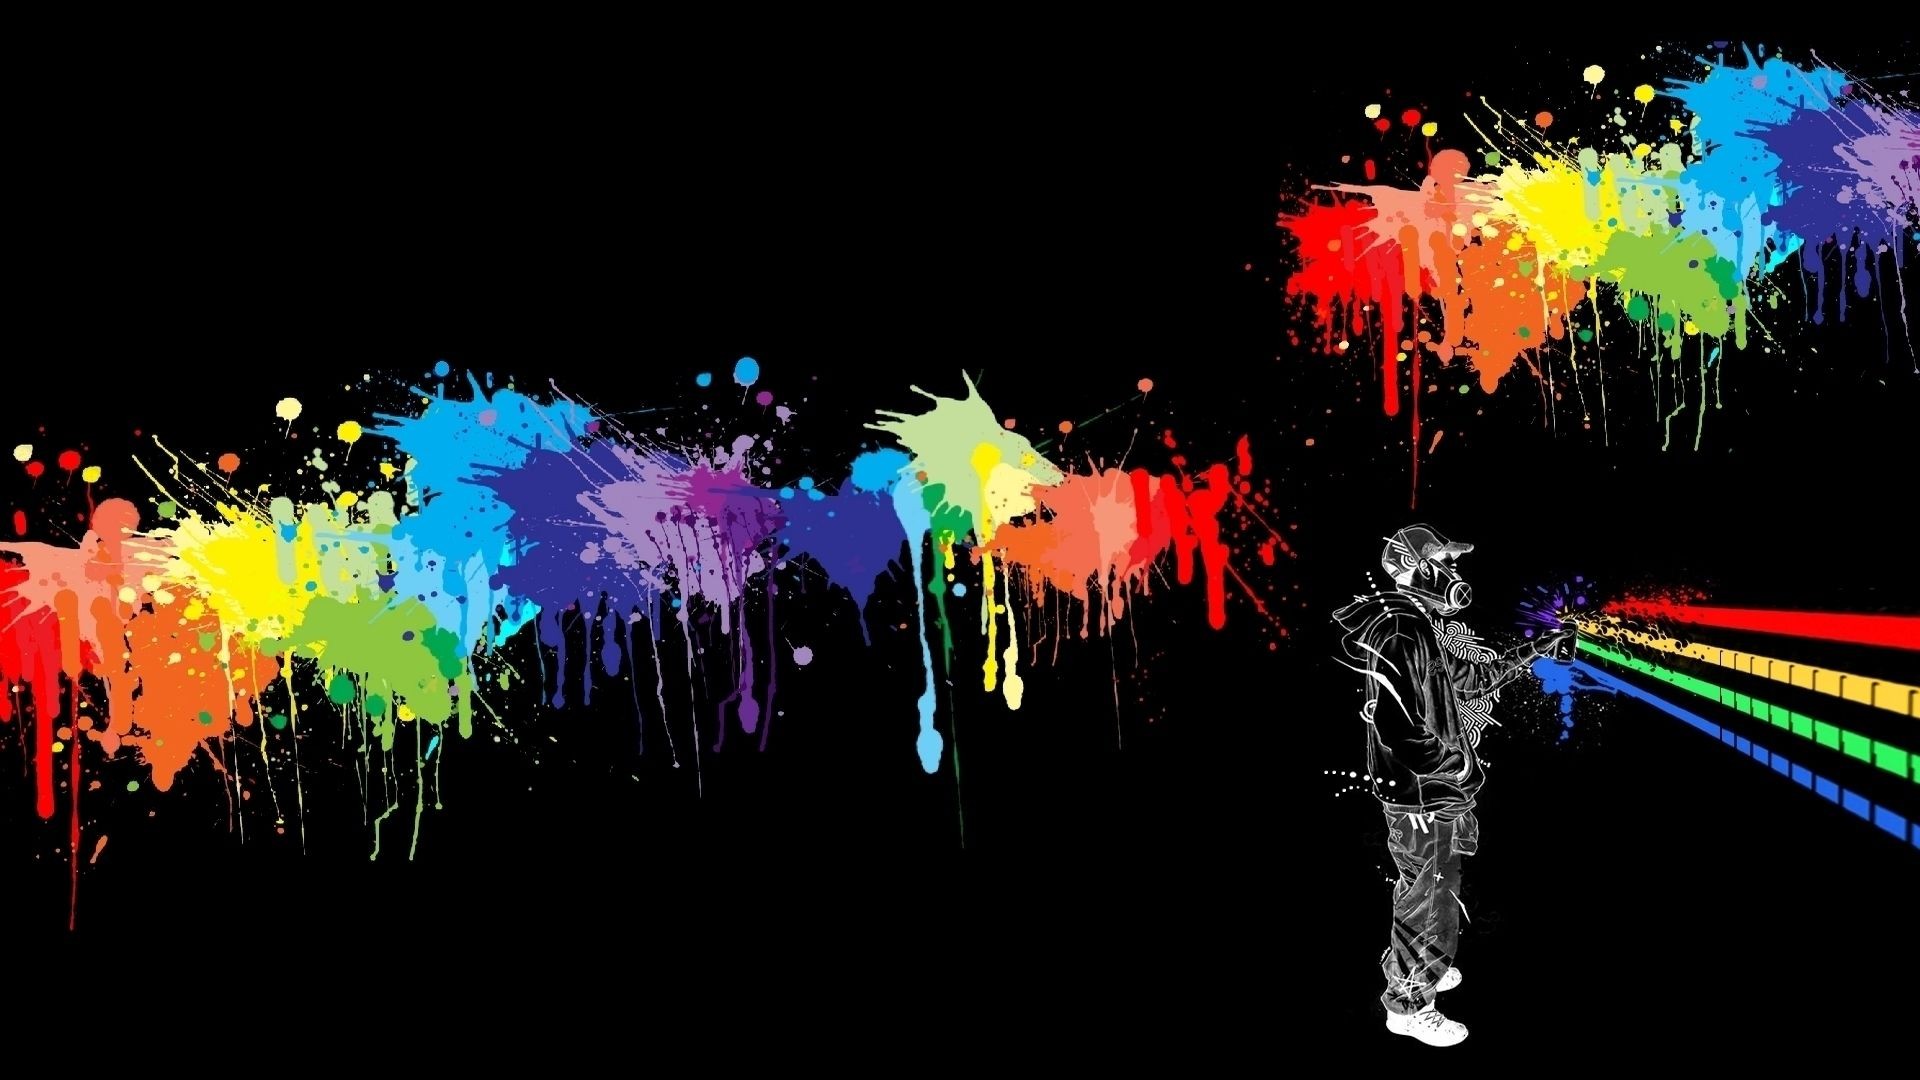 Graffiti Tag Background Wallpaper HD With Resolution 1920X1080 pixel. You can make this wallpaper for your Desktop Computer Backgrounds, Mac Wallpapers, Android Lock screen or iPhone Screensavers